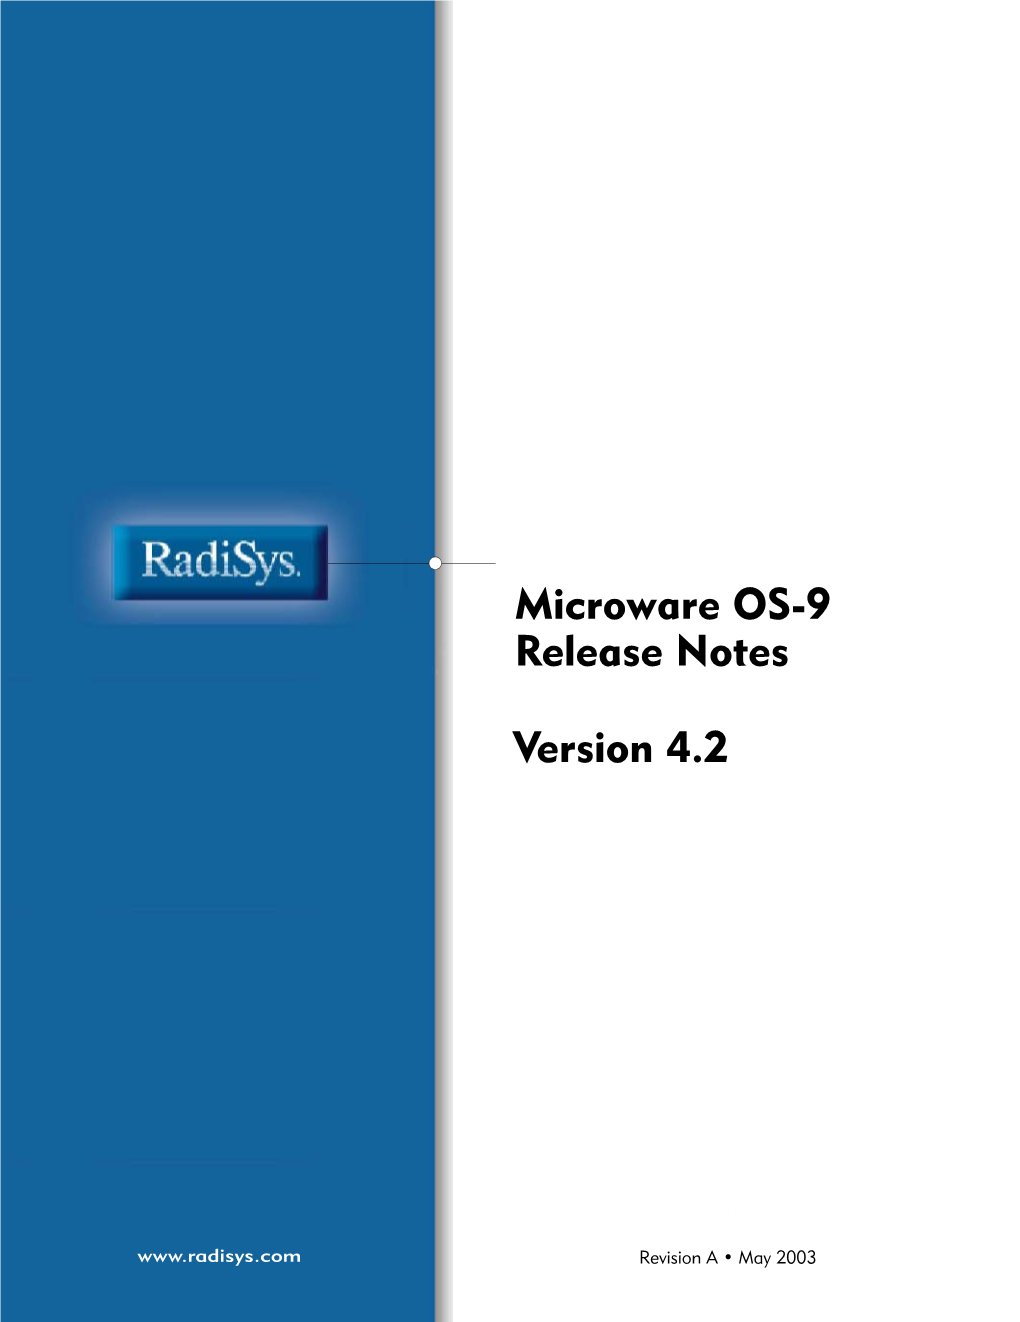 Microware OS-9 Release Notes Version